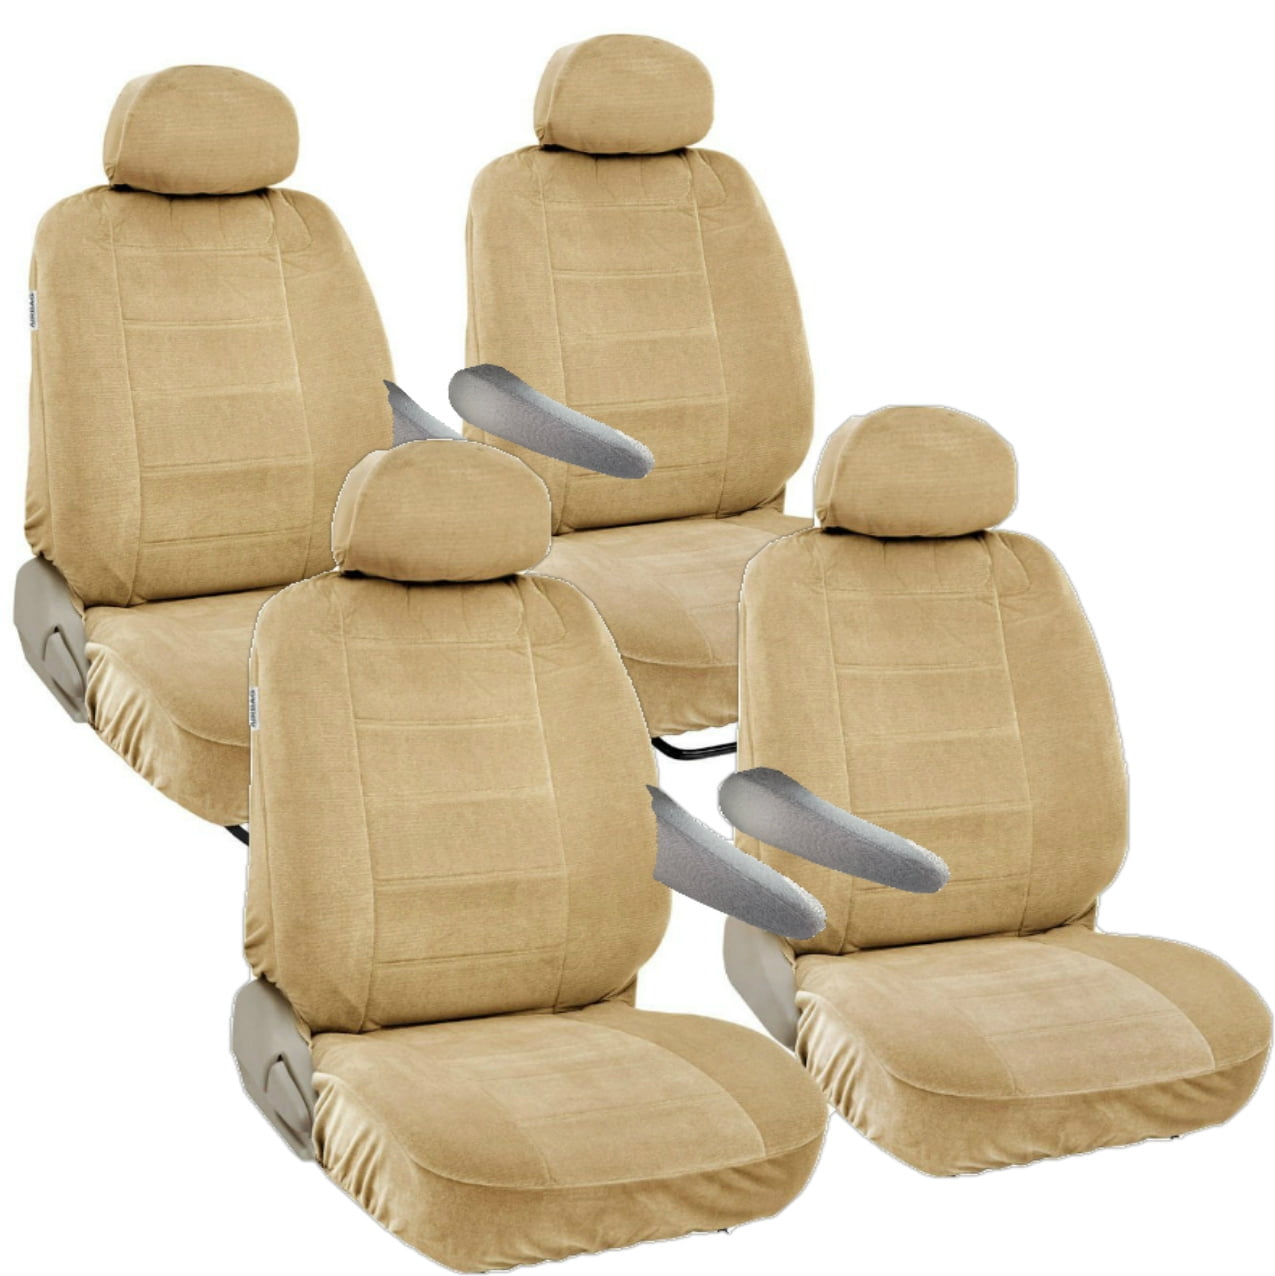 Seat Covers For Dodge Caravan 2010 - Velcromag Seat Covers For 2010 Dodge Grand Caravan